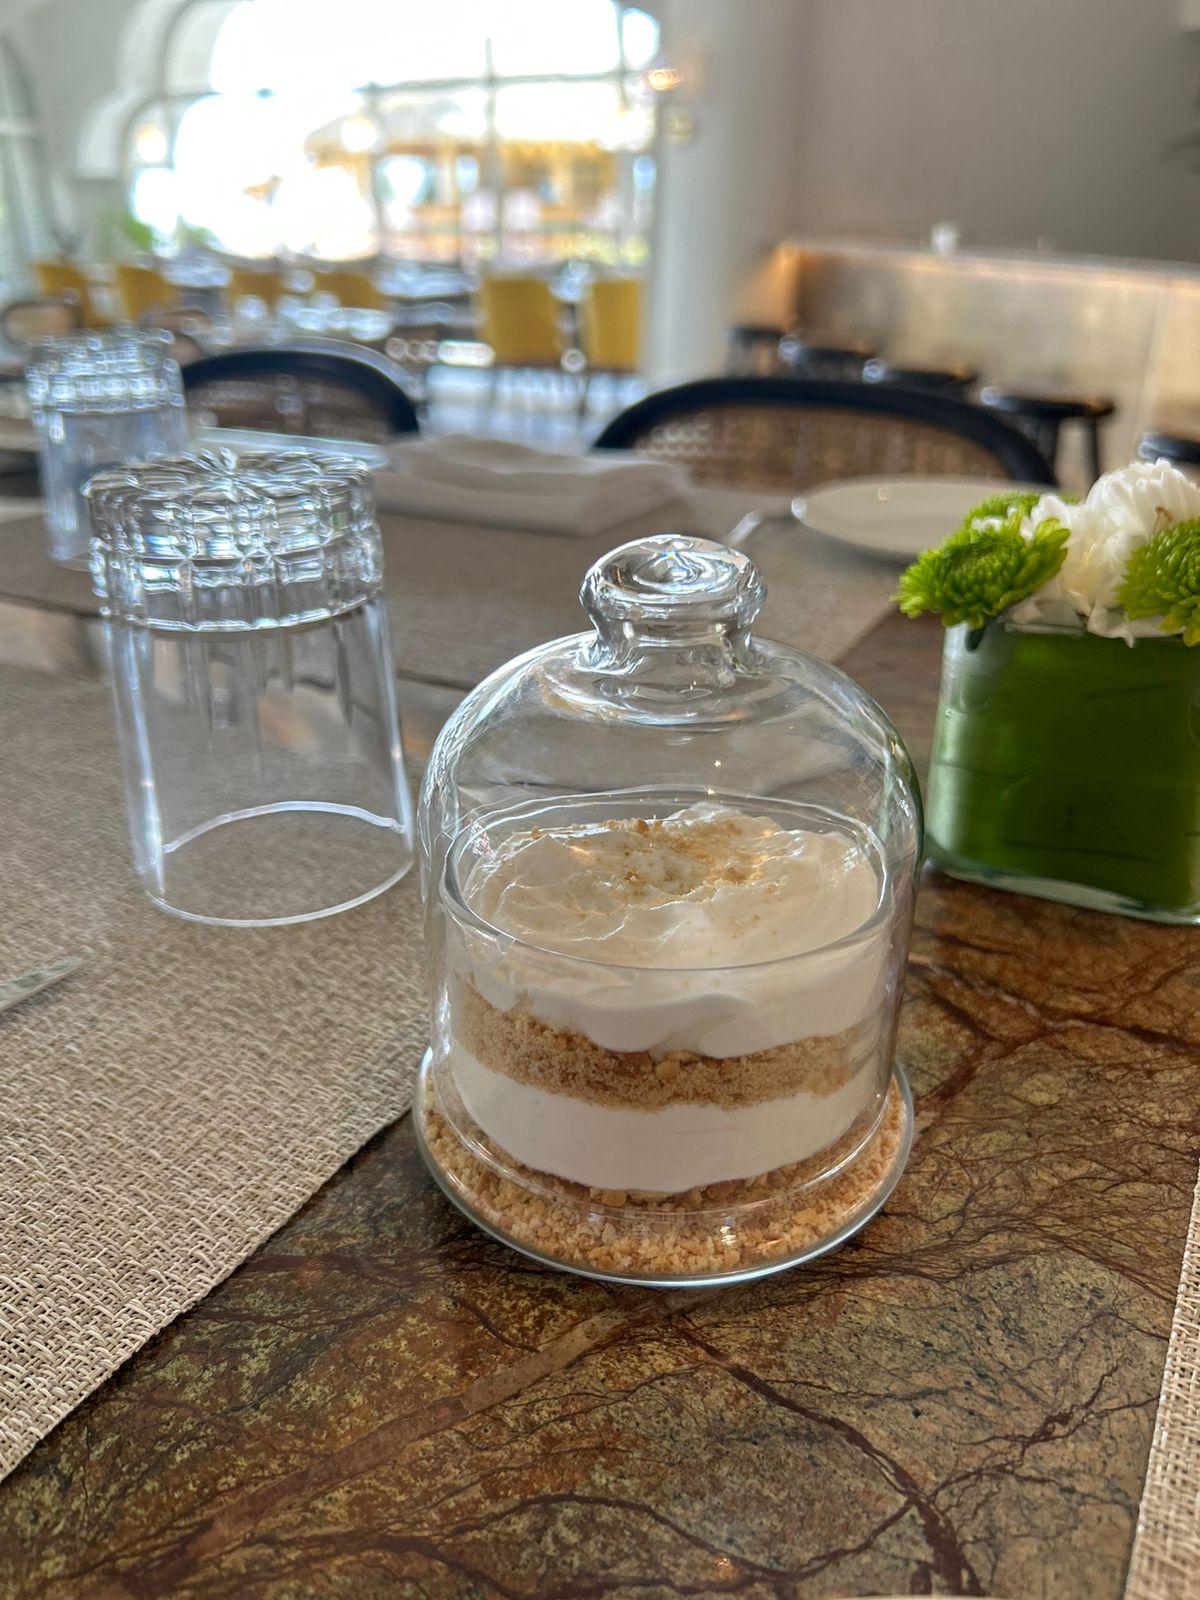 Serradura, a layered dessert with crushed biscuits and whipped cream